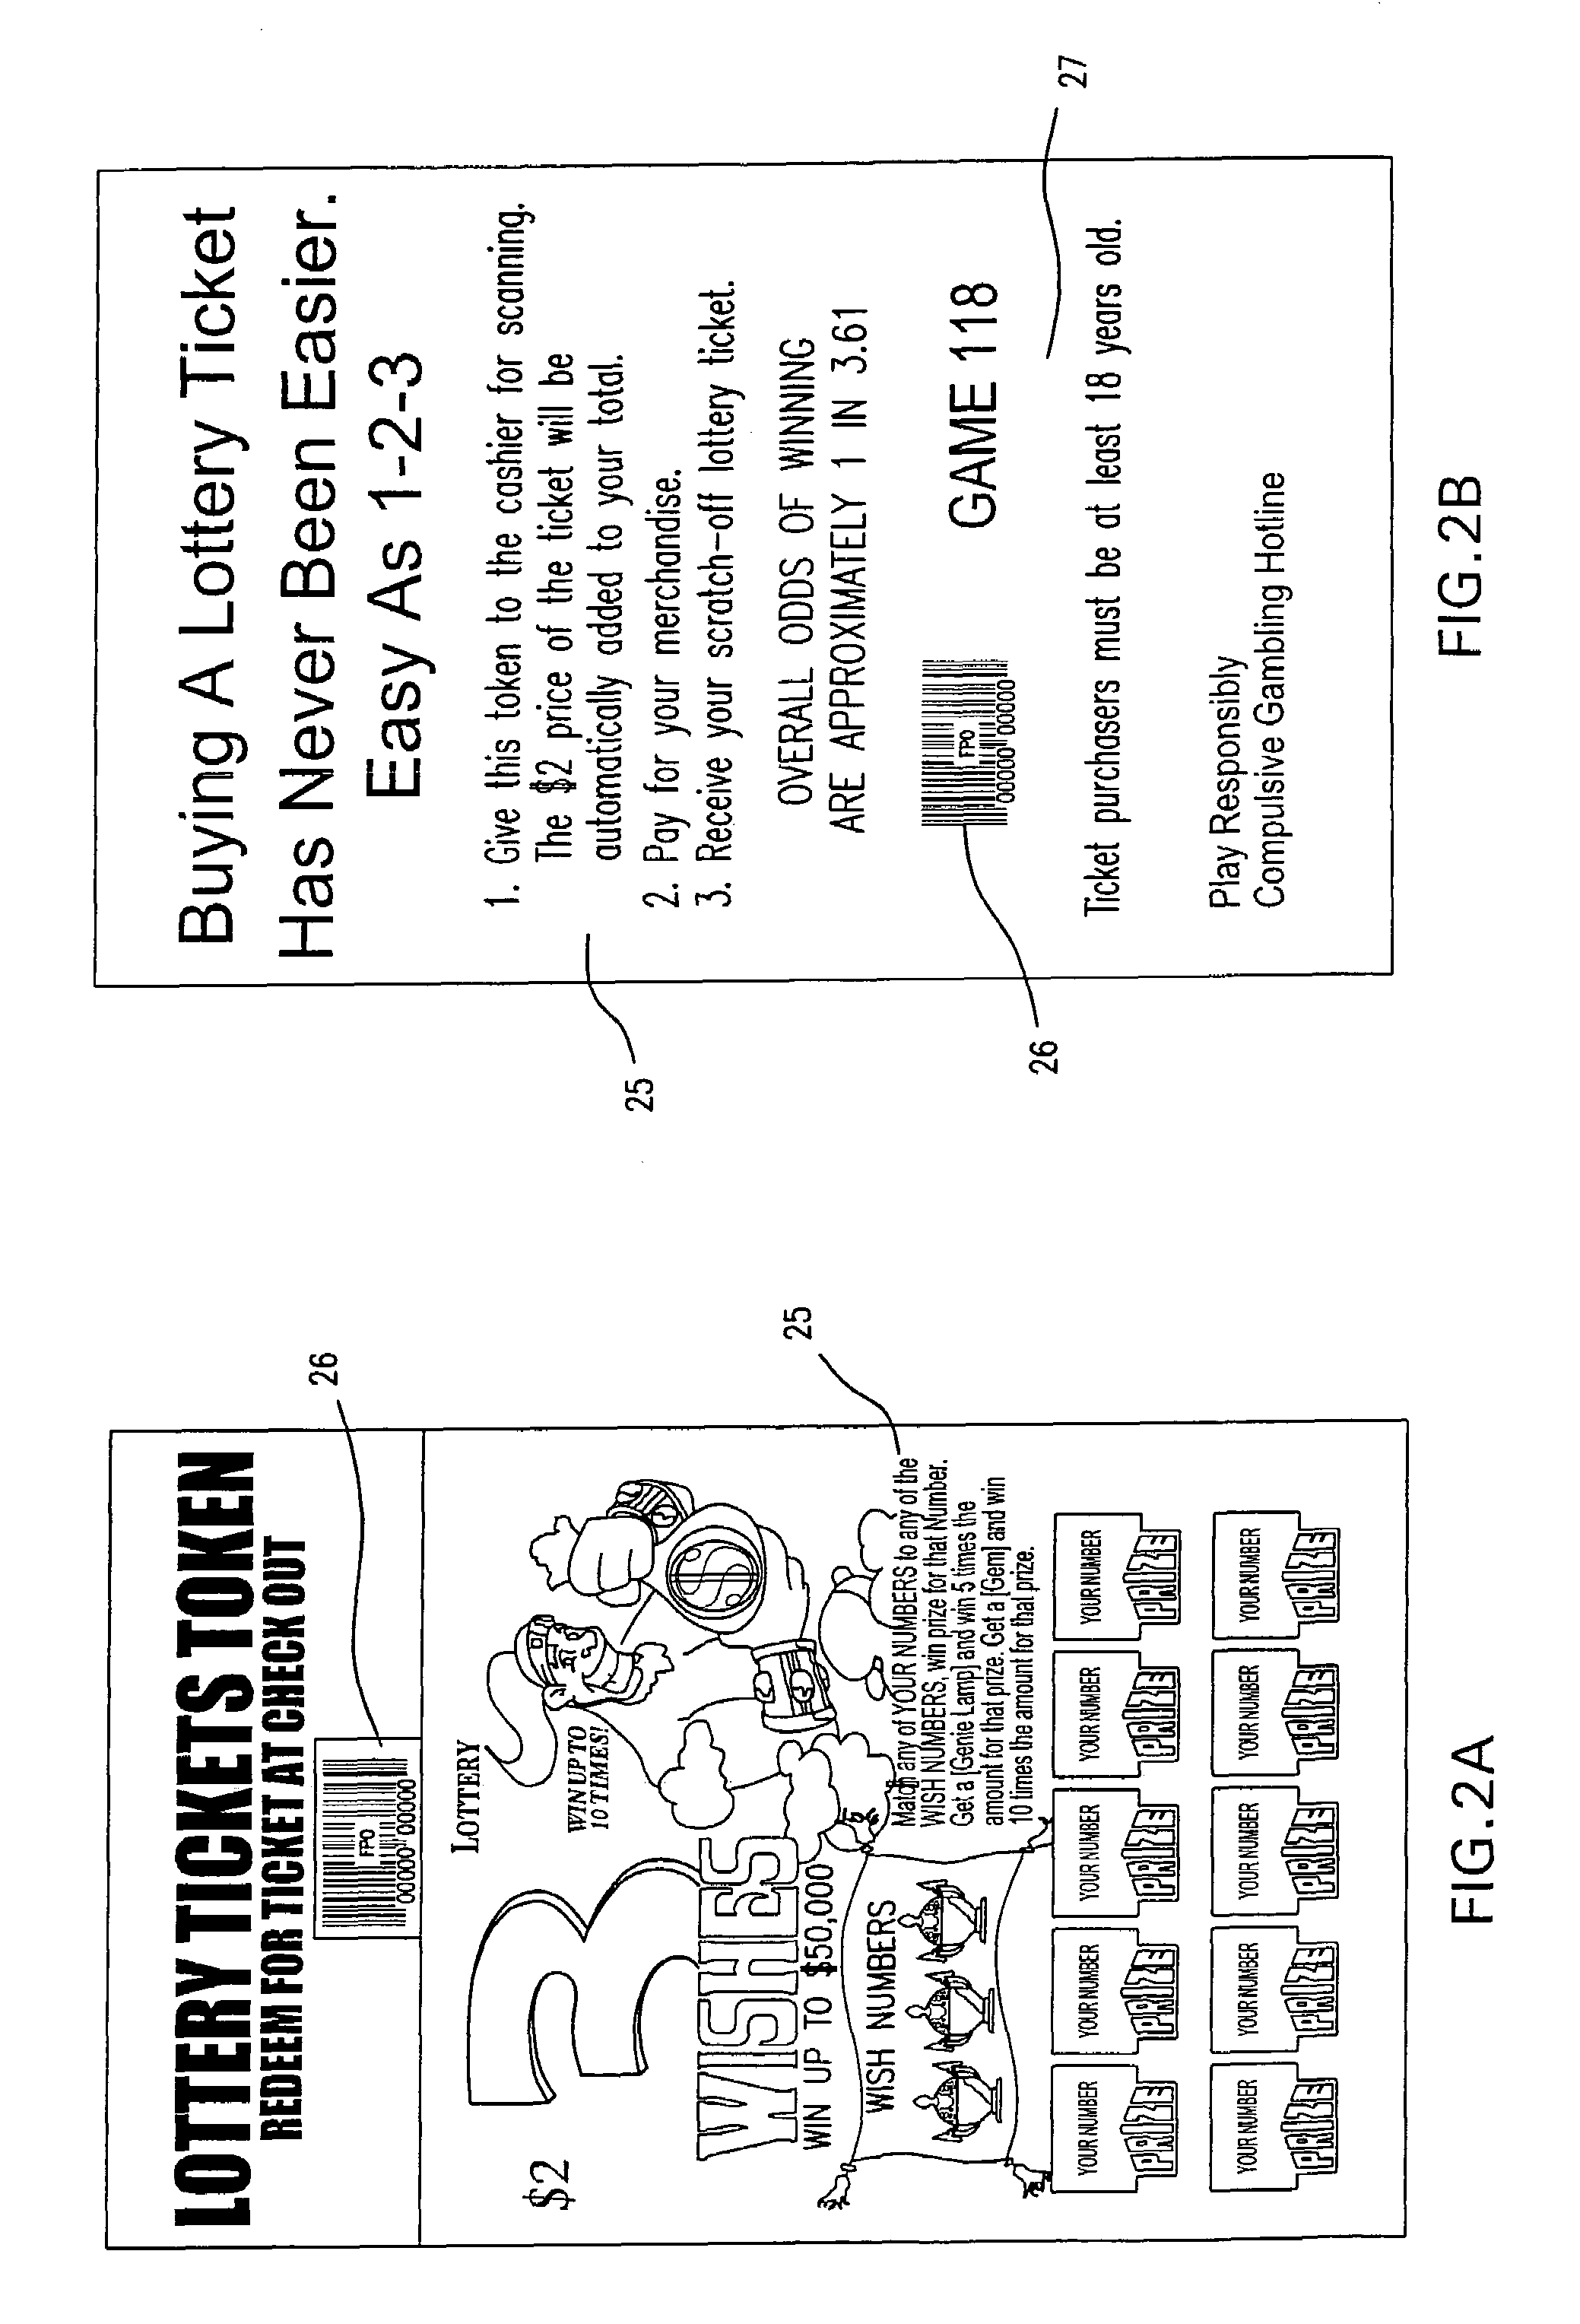 System and method for selling lottery game tickets through a point of sale system